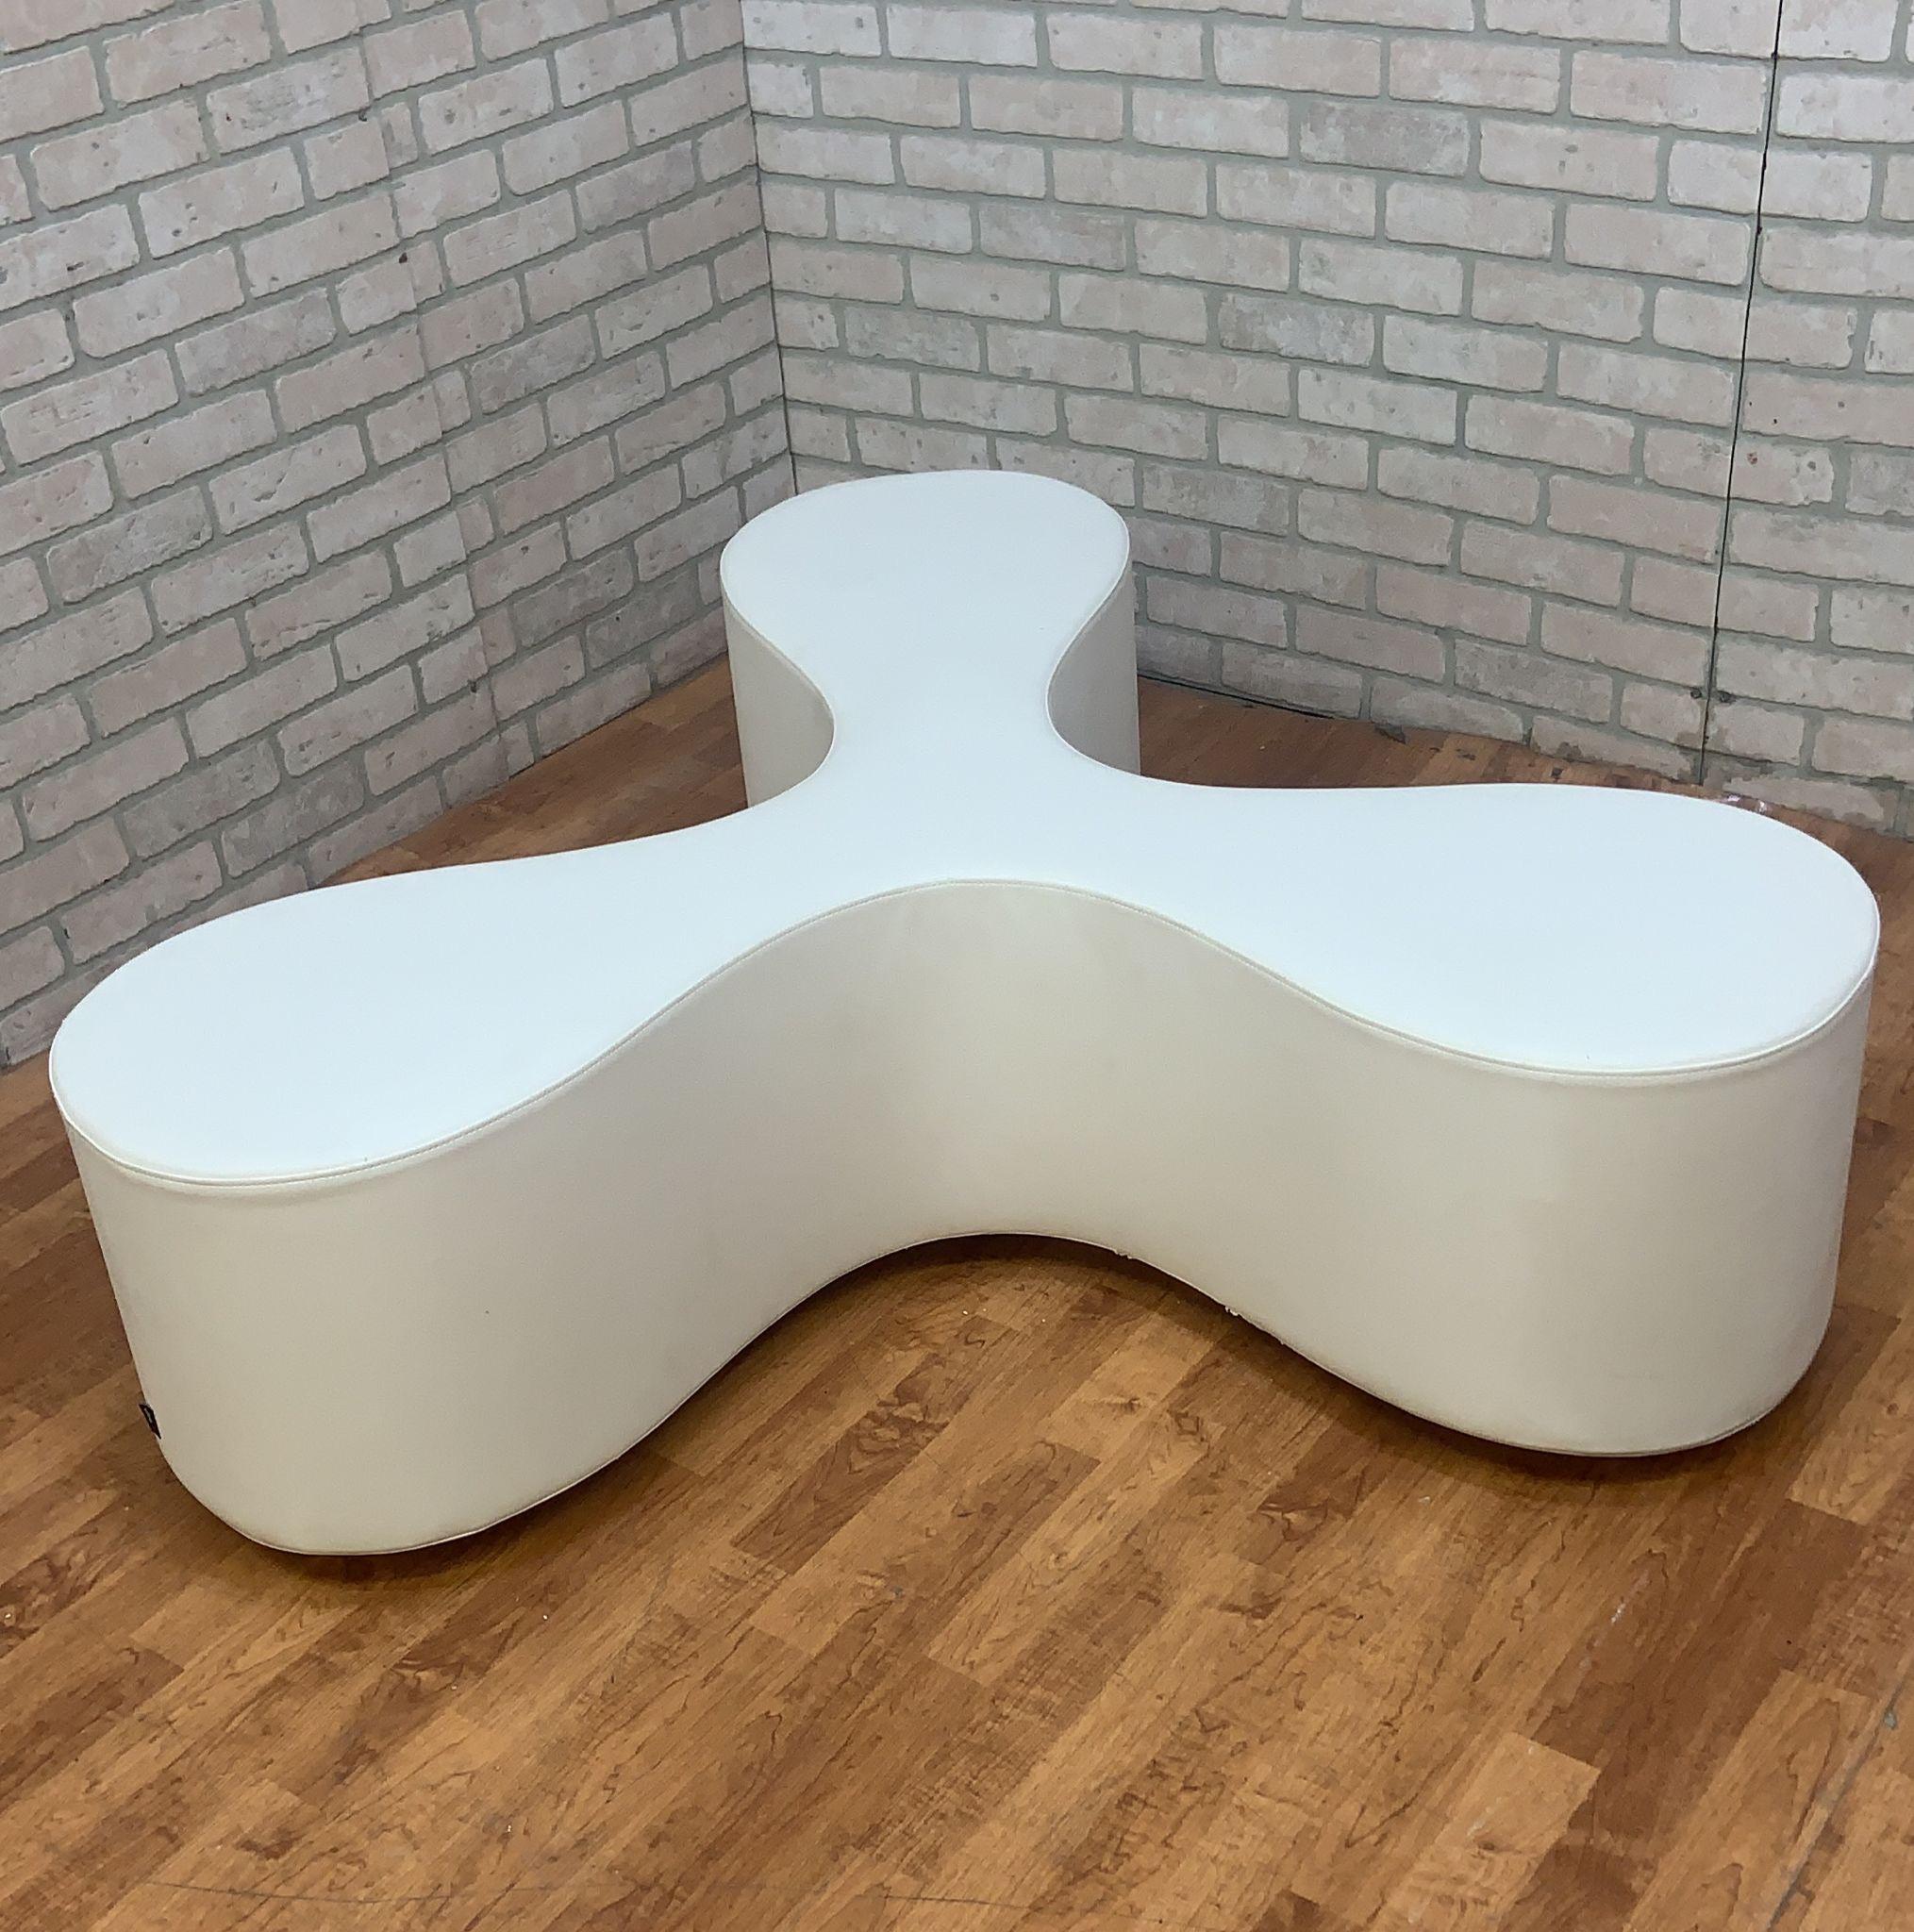 Sculptural Champaign White Leather Vitra Flower Bench By SANAA - Set of 3 In Good Condition For Sale In Chicago, IL